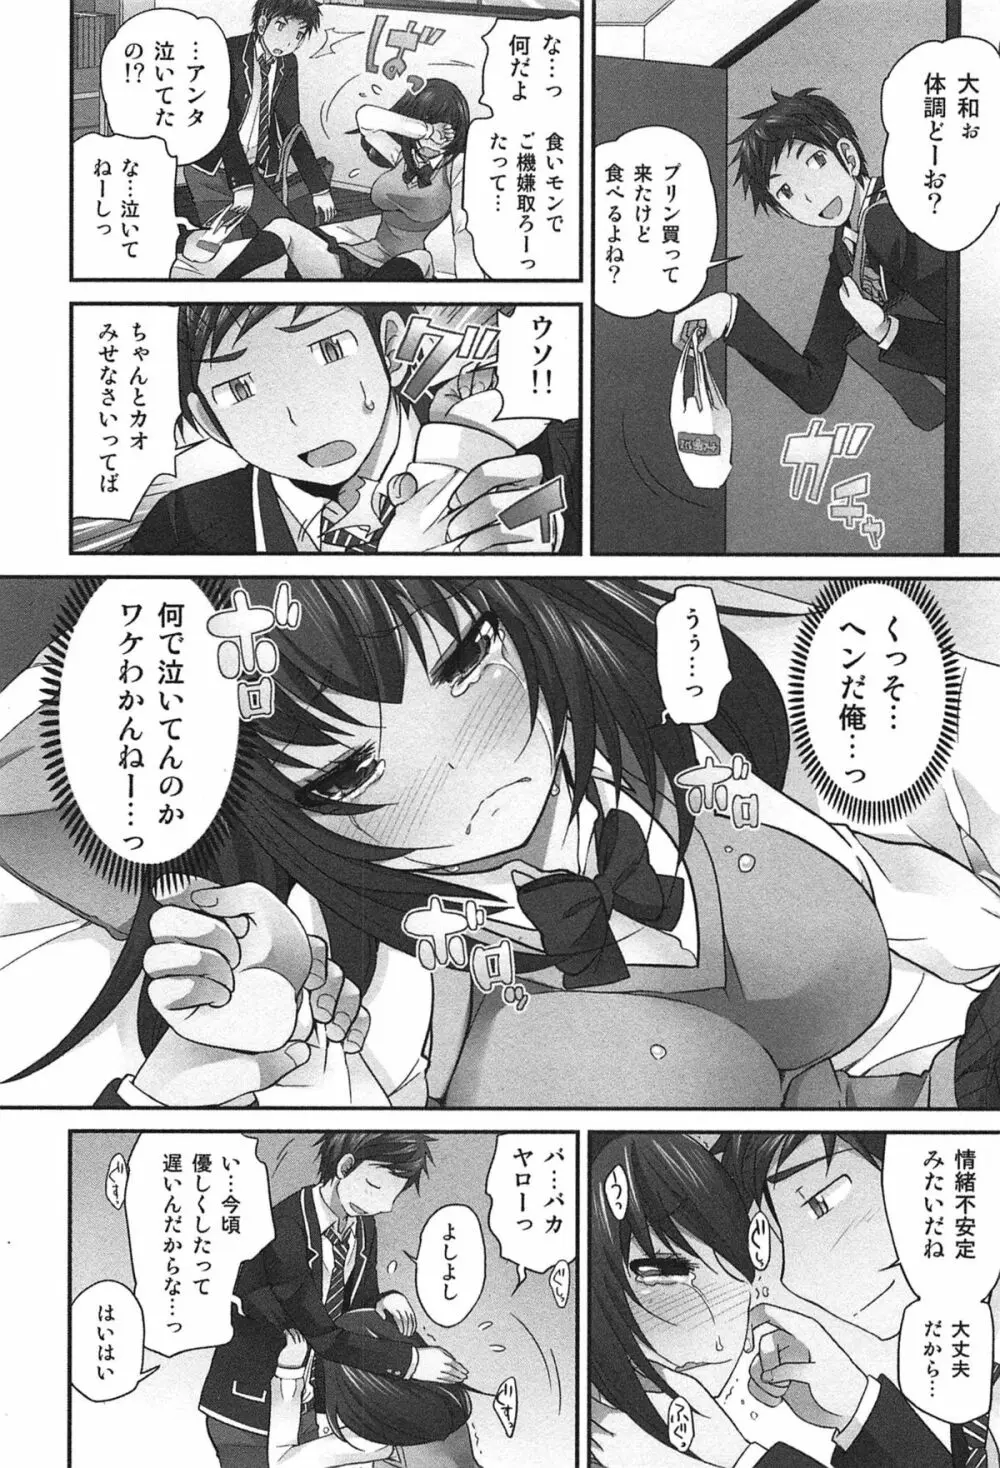 Exchange ～幼なじみと入れ替わり！？～ 161ページ